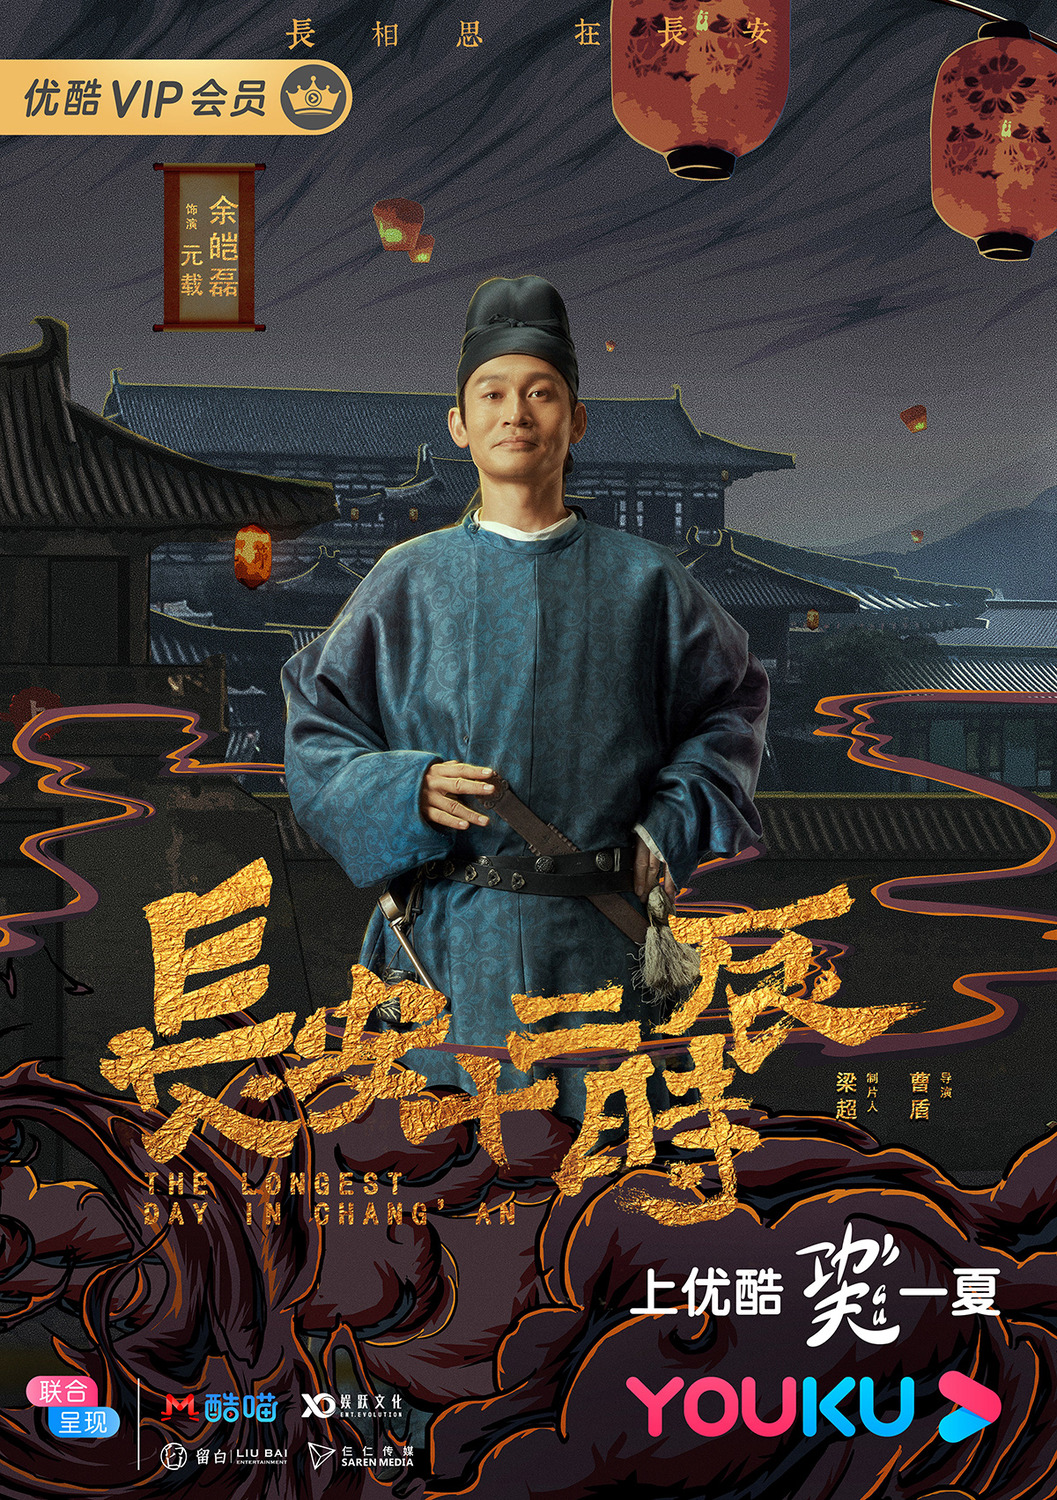 Extra Large TV Poster Image for Chang'an shi er shi chen (#15 of 18)